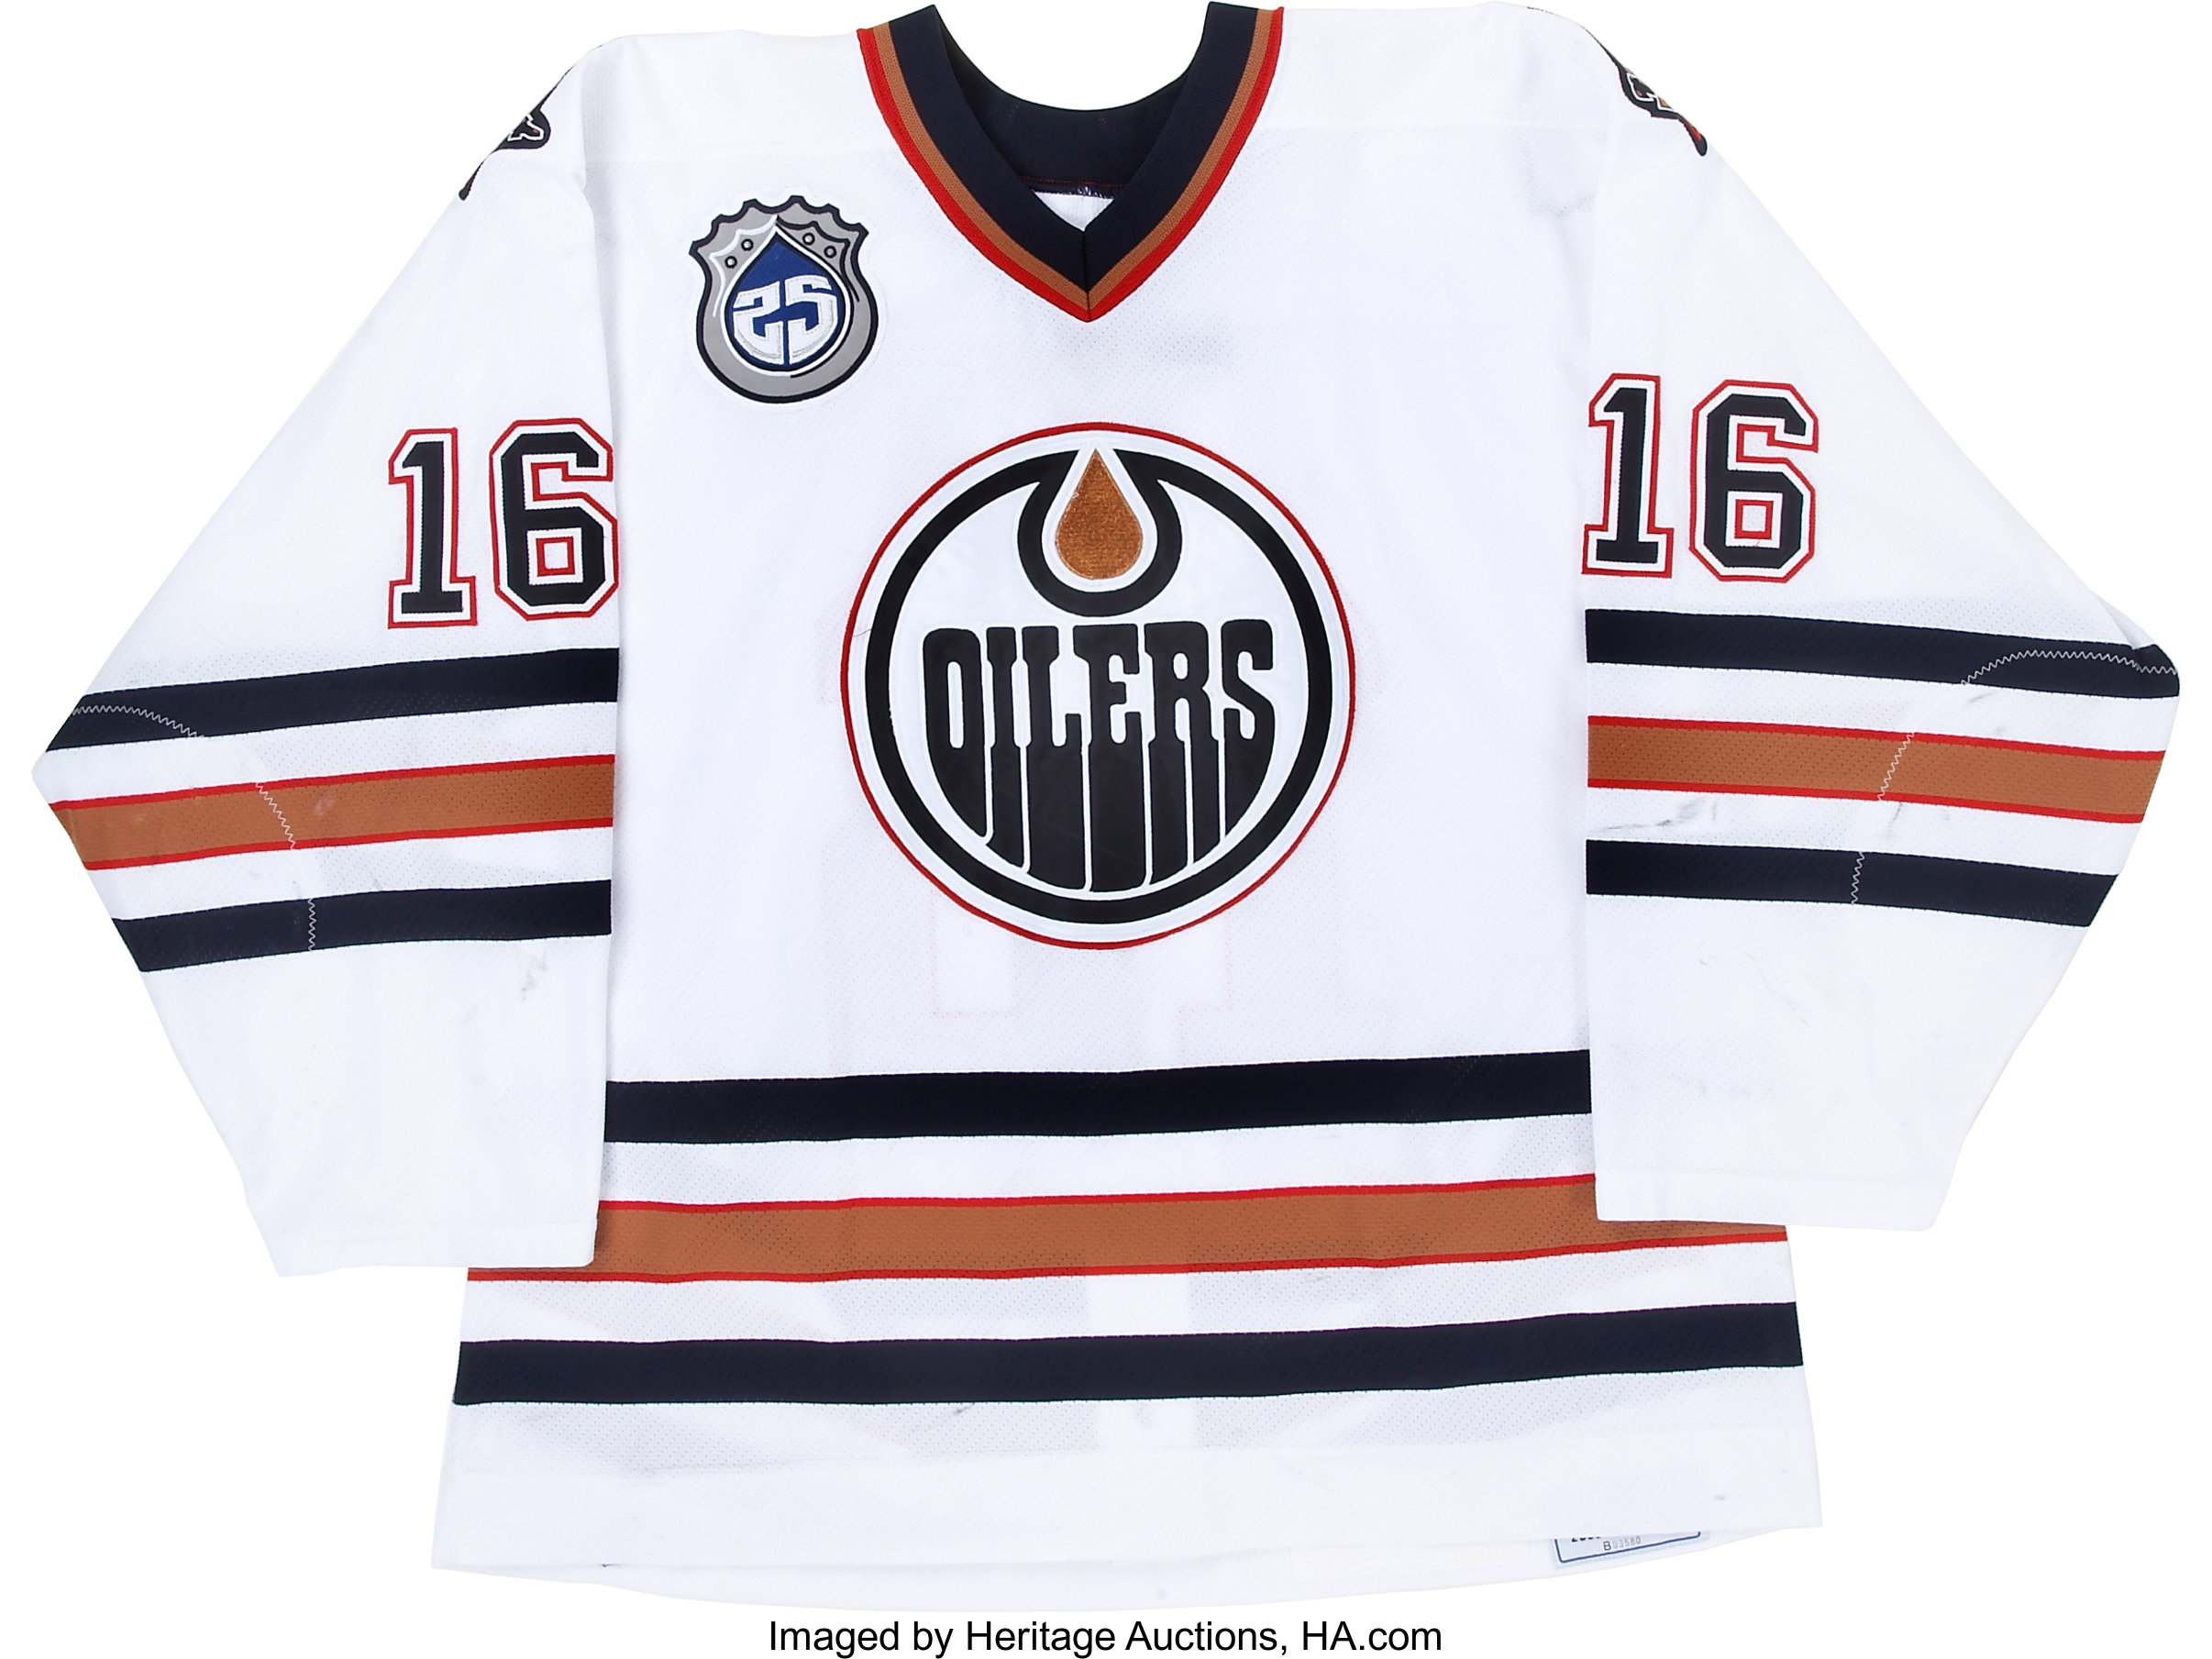 Edmonton Oilers on X: We're also excited to unveil the #Oilers retro jersey  that will be worn four times this season vs. former Smythe Division  opponents, plus the 40th anniversary jersey patch